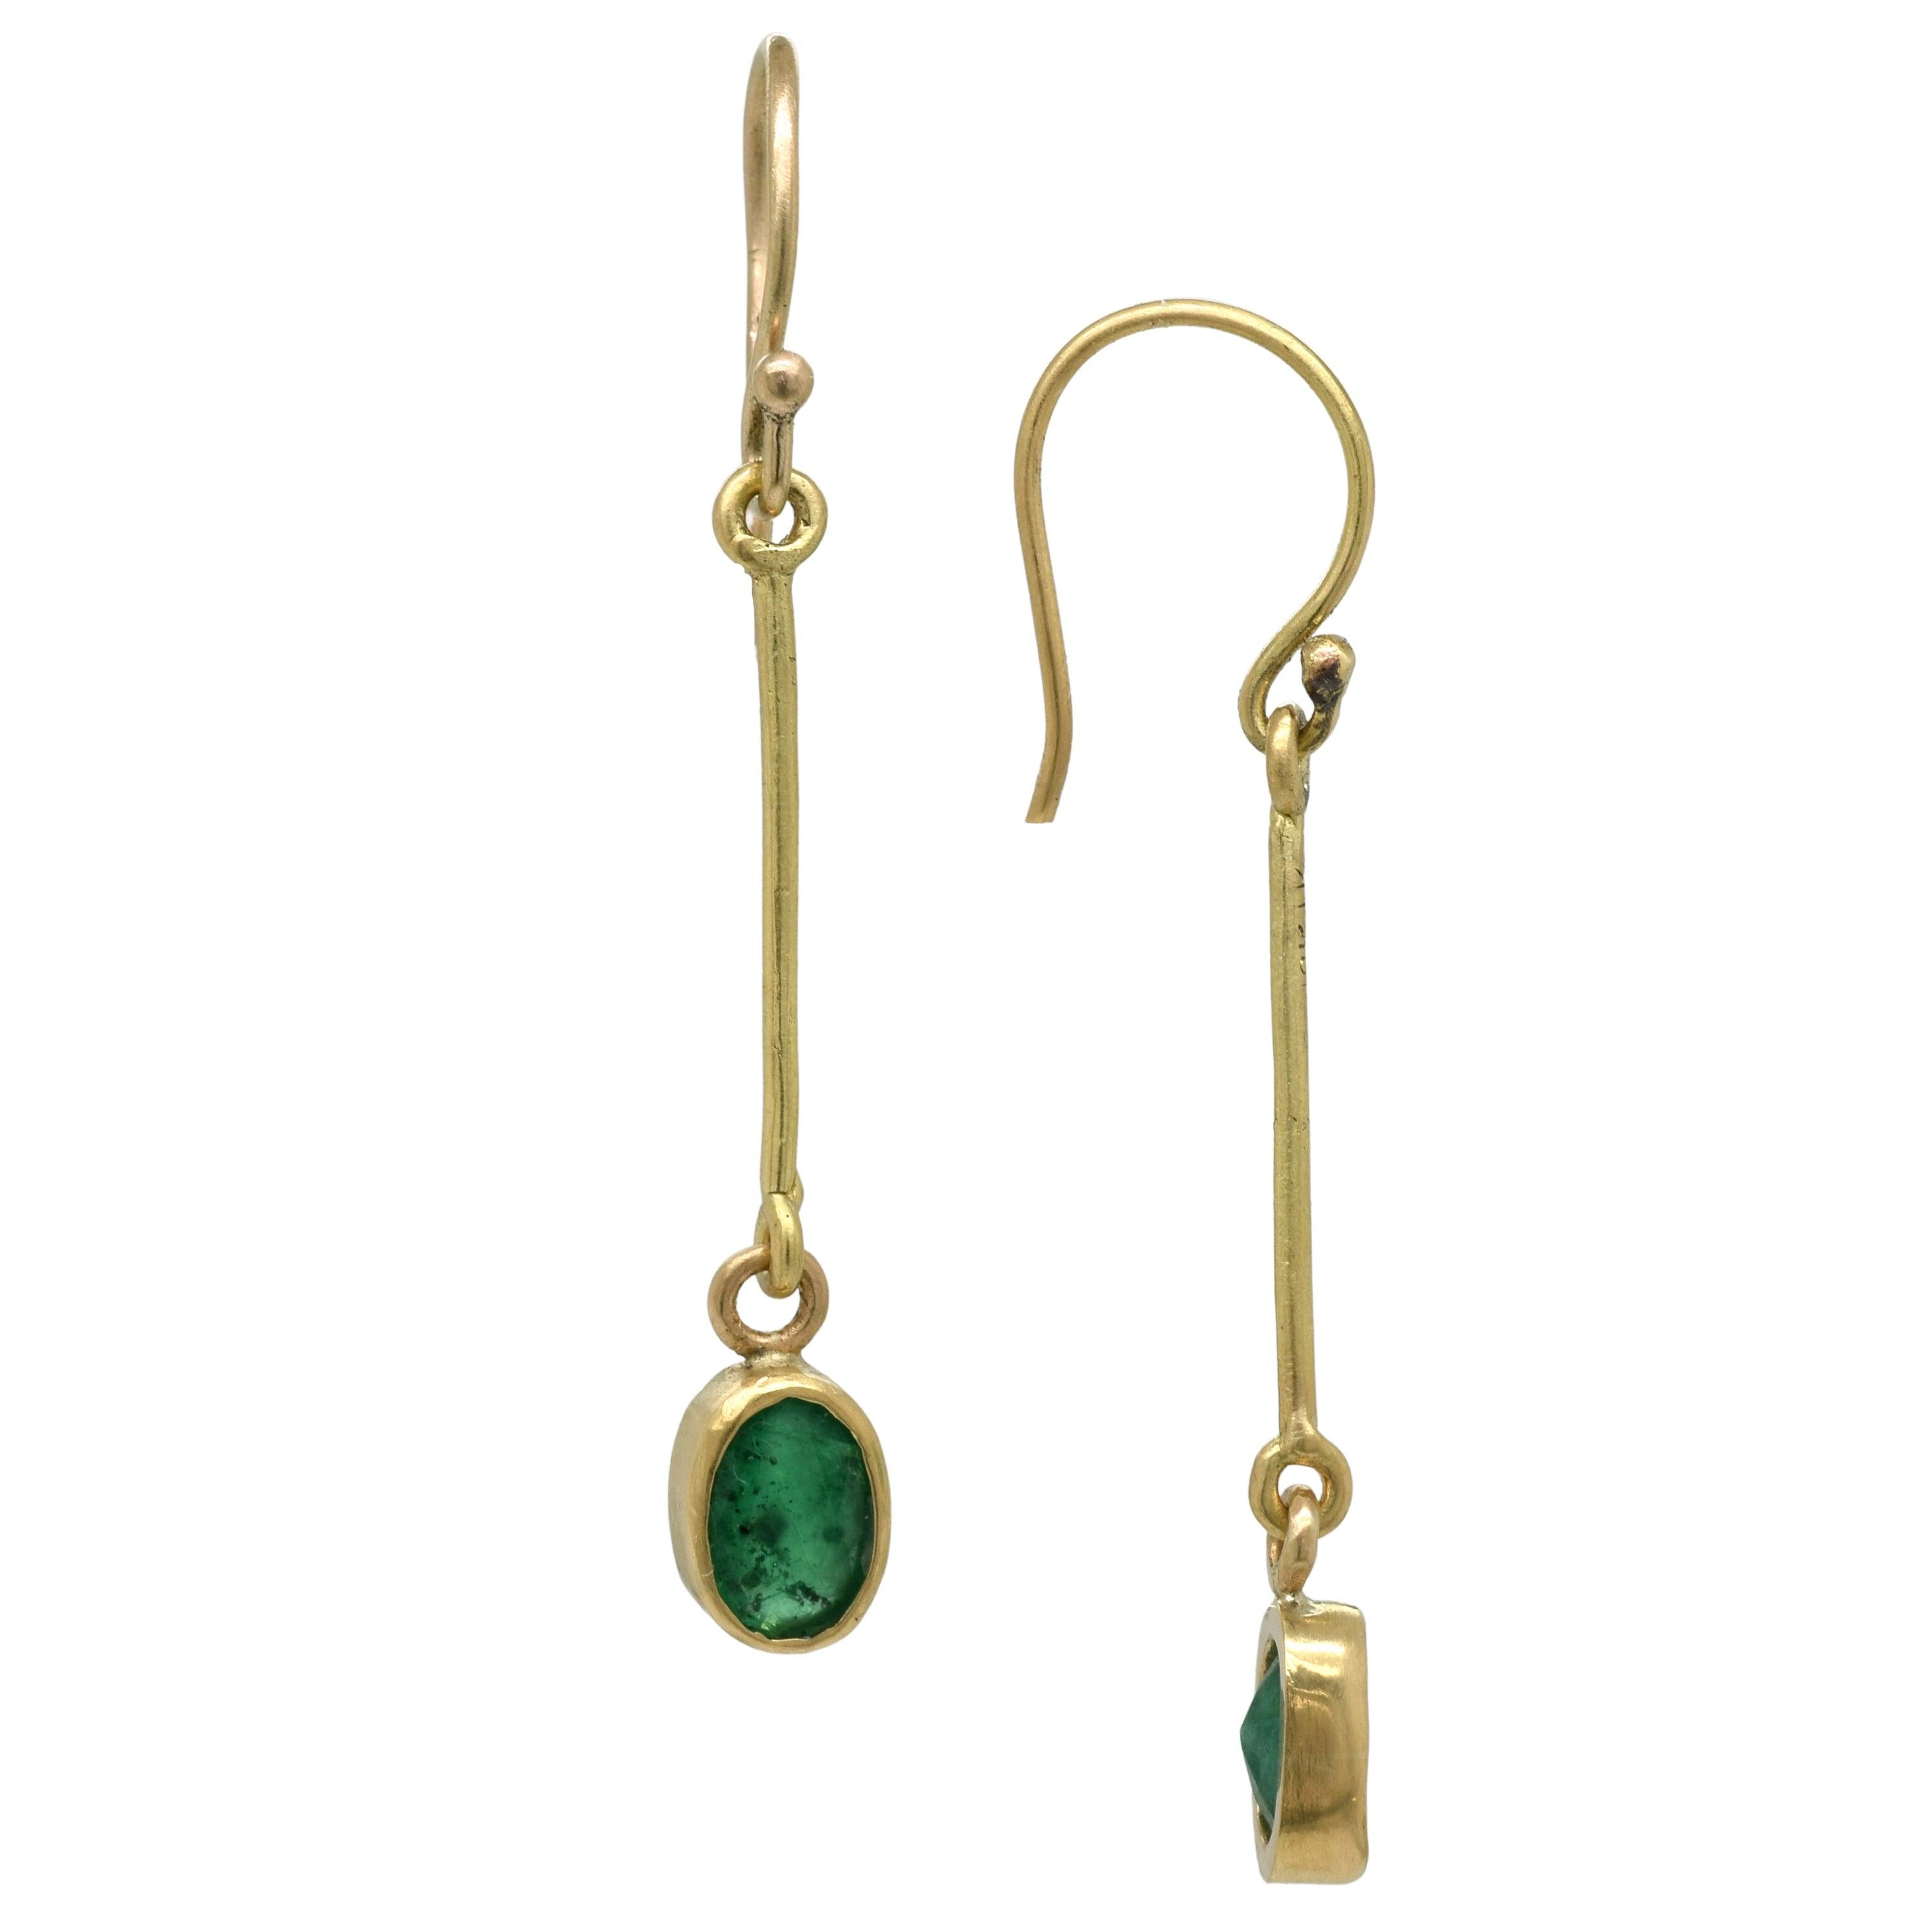 Inspired by art deco design, these 18k gold earrings feature delightfully faceted emerald ovals.
Measures: 1.75